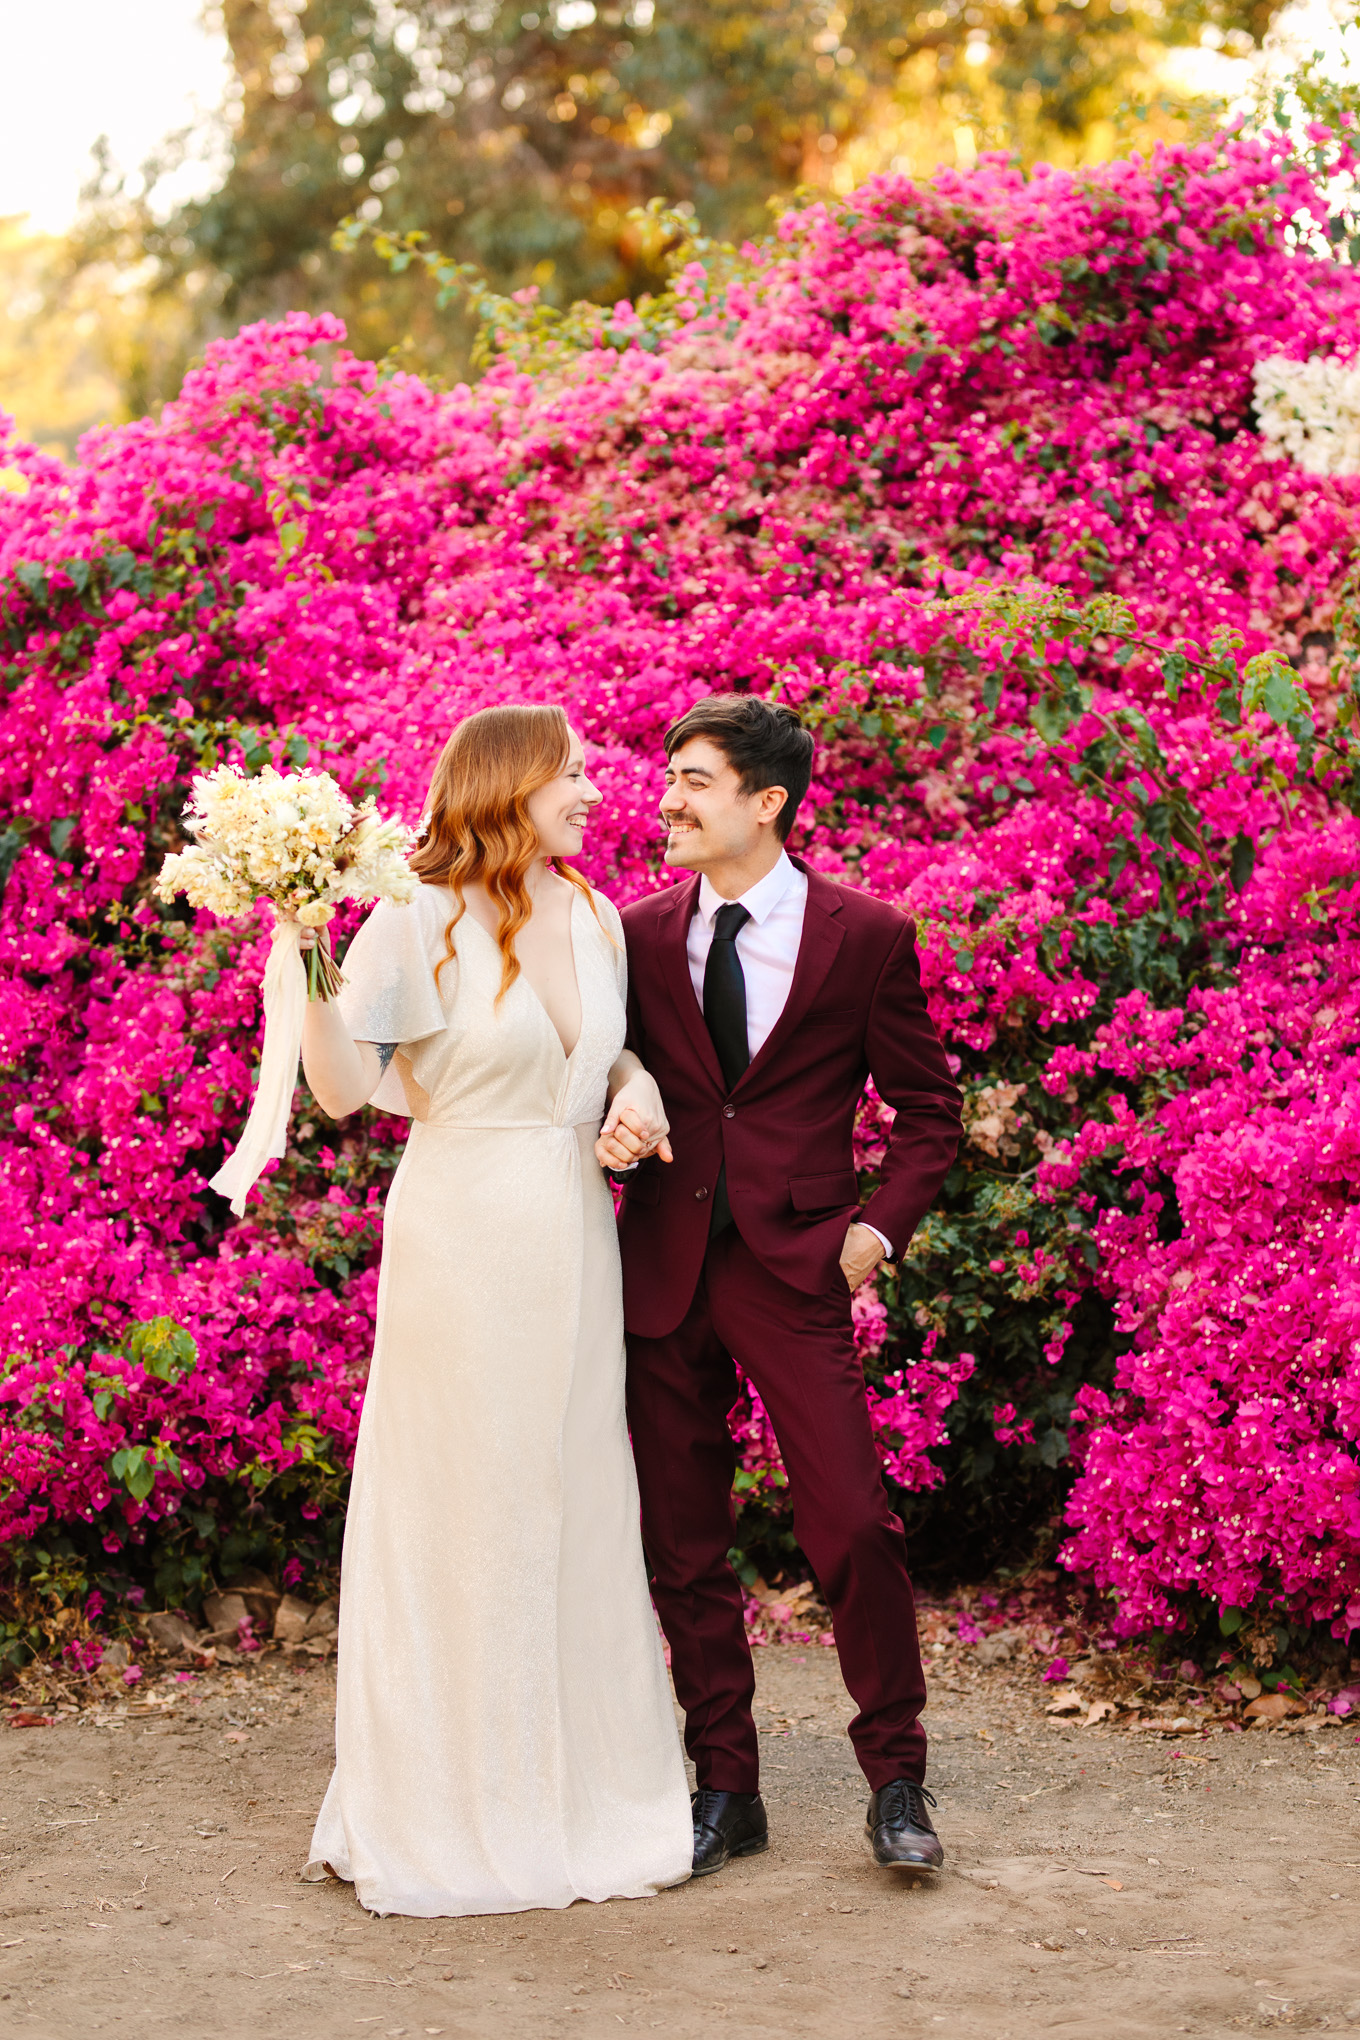 Blooming bougainvillea at LA Arboretum | Best Southern California Garden Wedding Venues | Colorful and elevated wedding photography for fun-loving couples | #gardenvenue #weddingvenue #socalweddingvenue #bouquetideas #uniquebouquet   Source: Mary Costa Photography | Los Angeles 